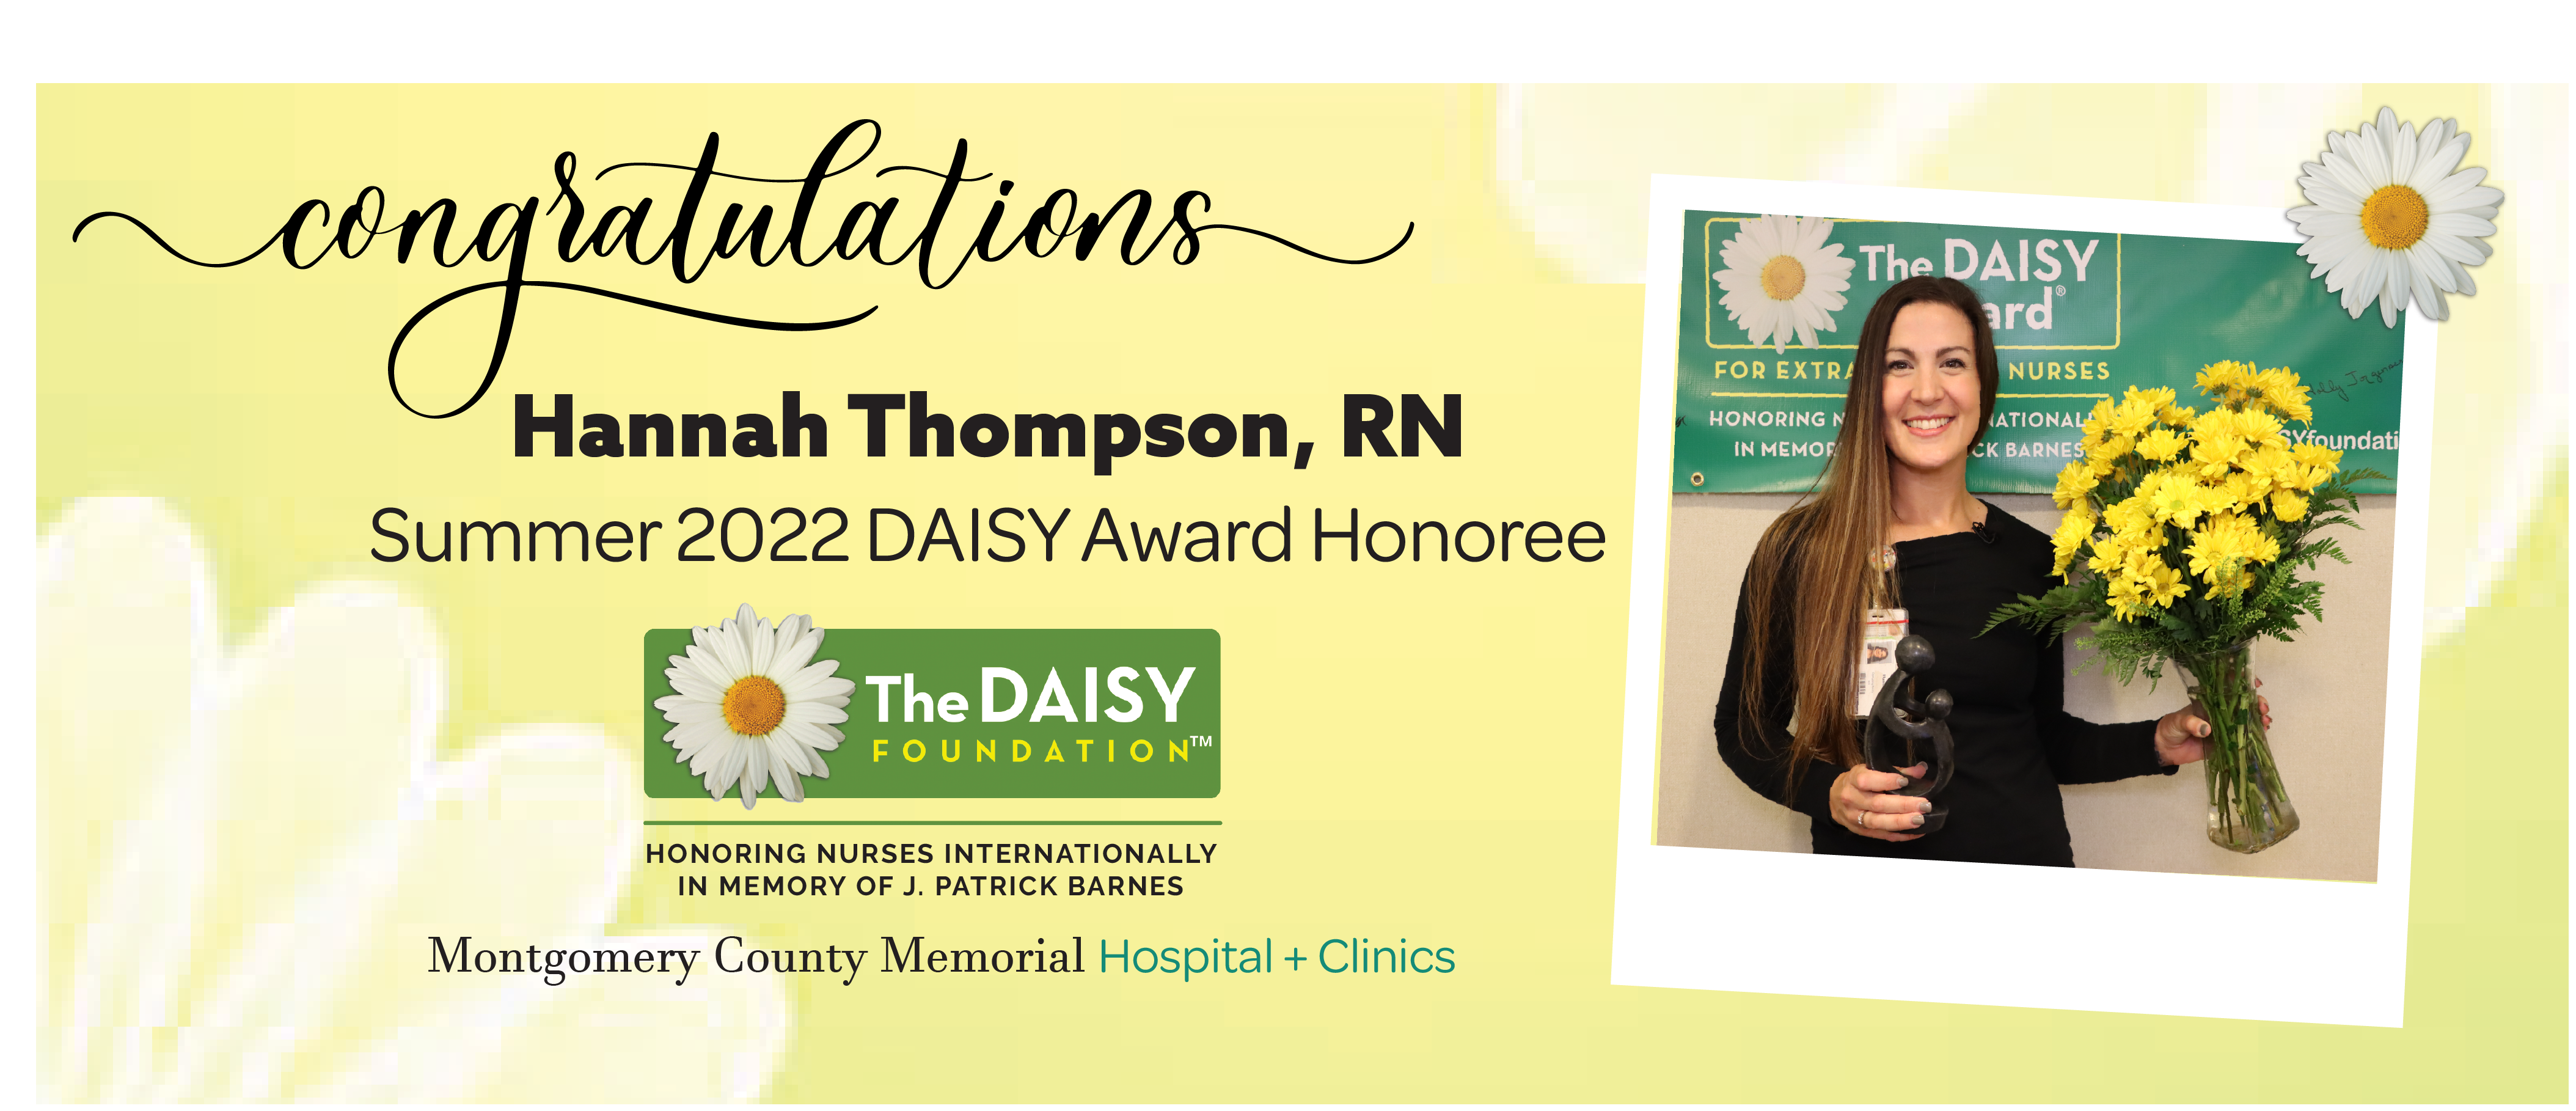 Banner picture of smiling Hannah Thompson holding a vase of flowers and a sculpture Daisy Award. Banner says:
Congratulations Hannah Thompson, RN
Summer 2022 DAISY Award Honoree

The DAISY FOUNDATION
HONORING NURSES INTERNATIONALLY IN MEMORY OF J. PATRICK BARNES

Montogmery County Memorial Hospital + Clinics